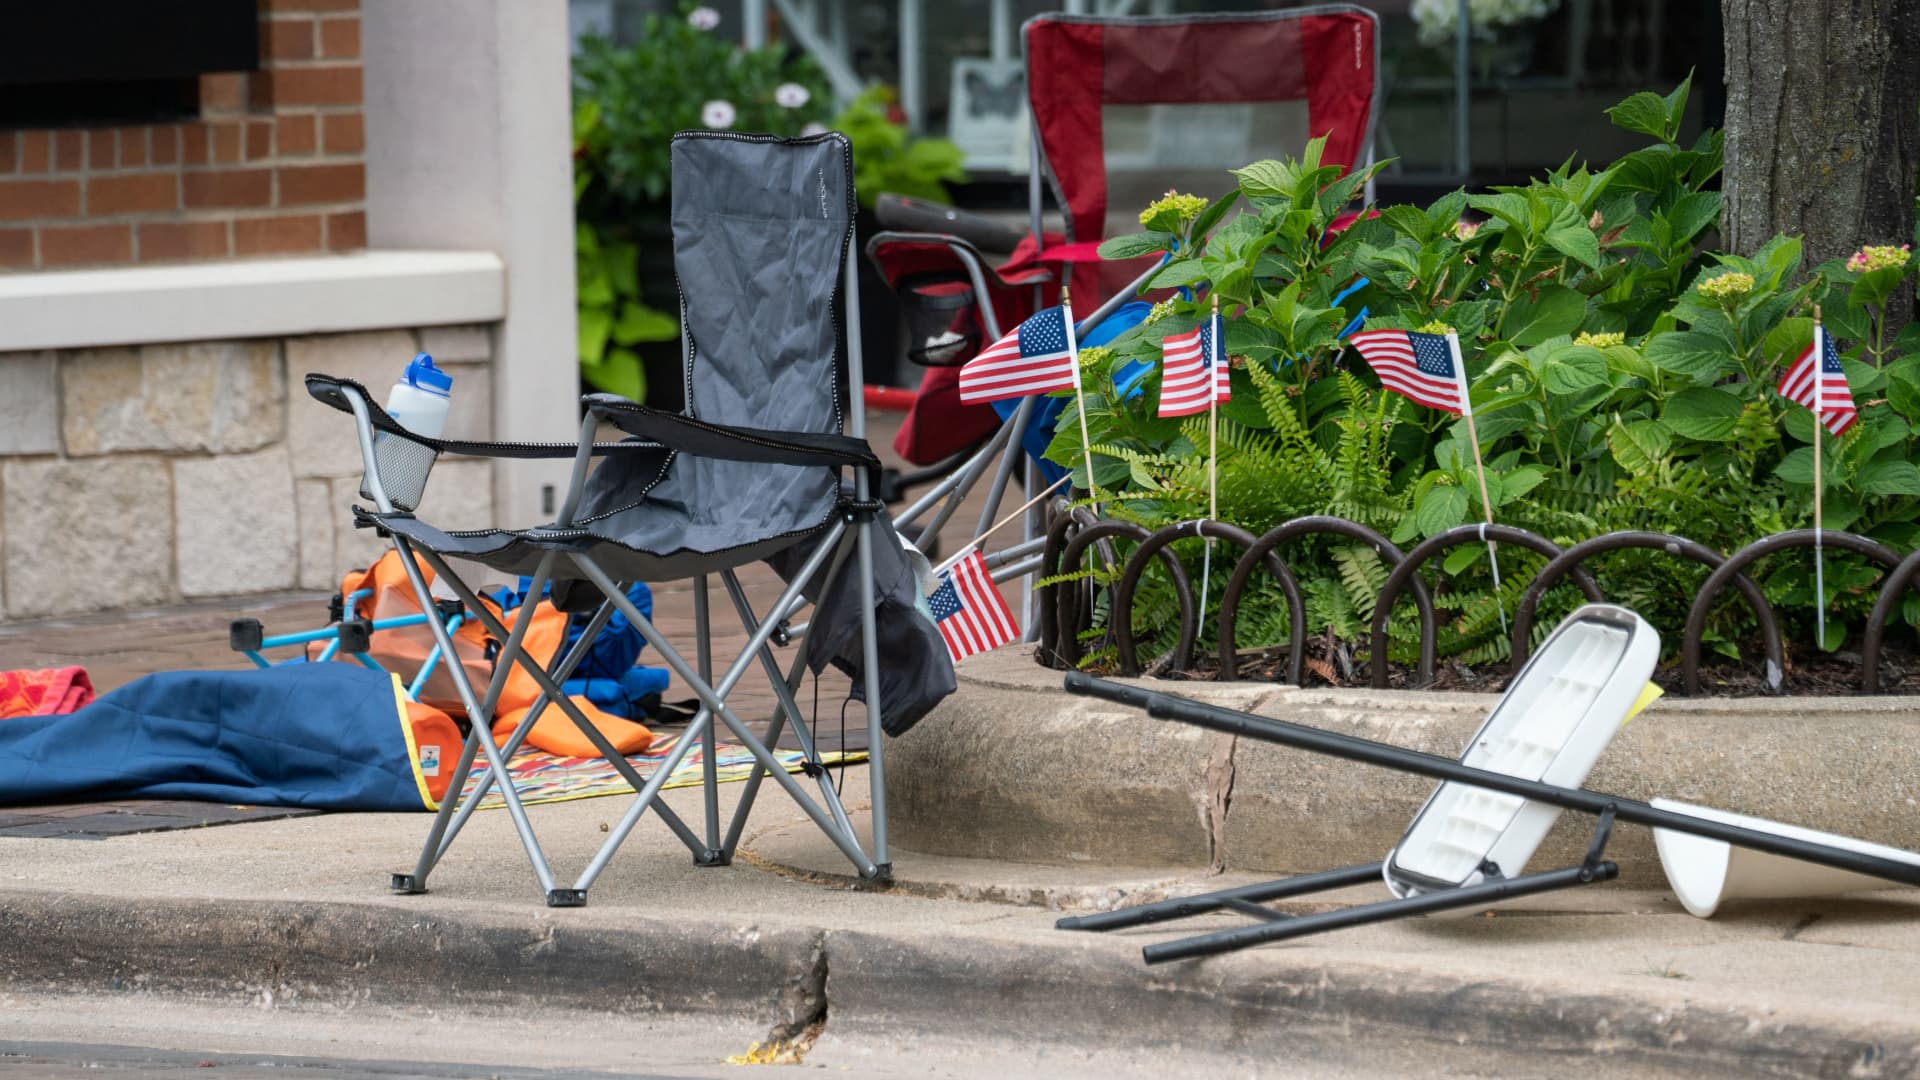 Portable chairs are left behind on Central Avenue after a mass shooting at a Fourth of July parade route in the wealthy Chicago suburb of Highland Park, Illinois, on July 4, 2022.